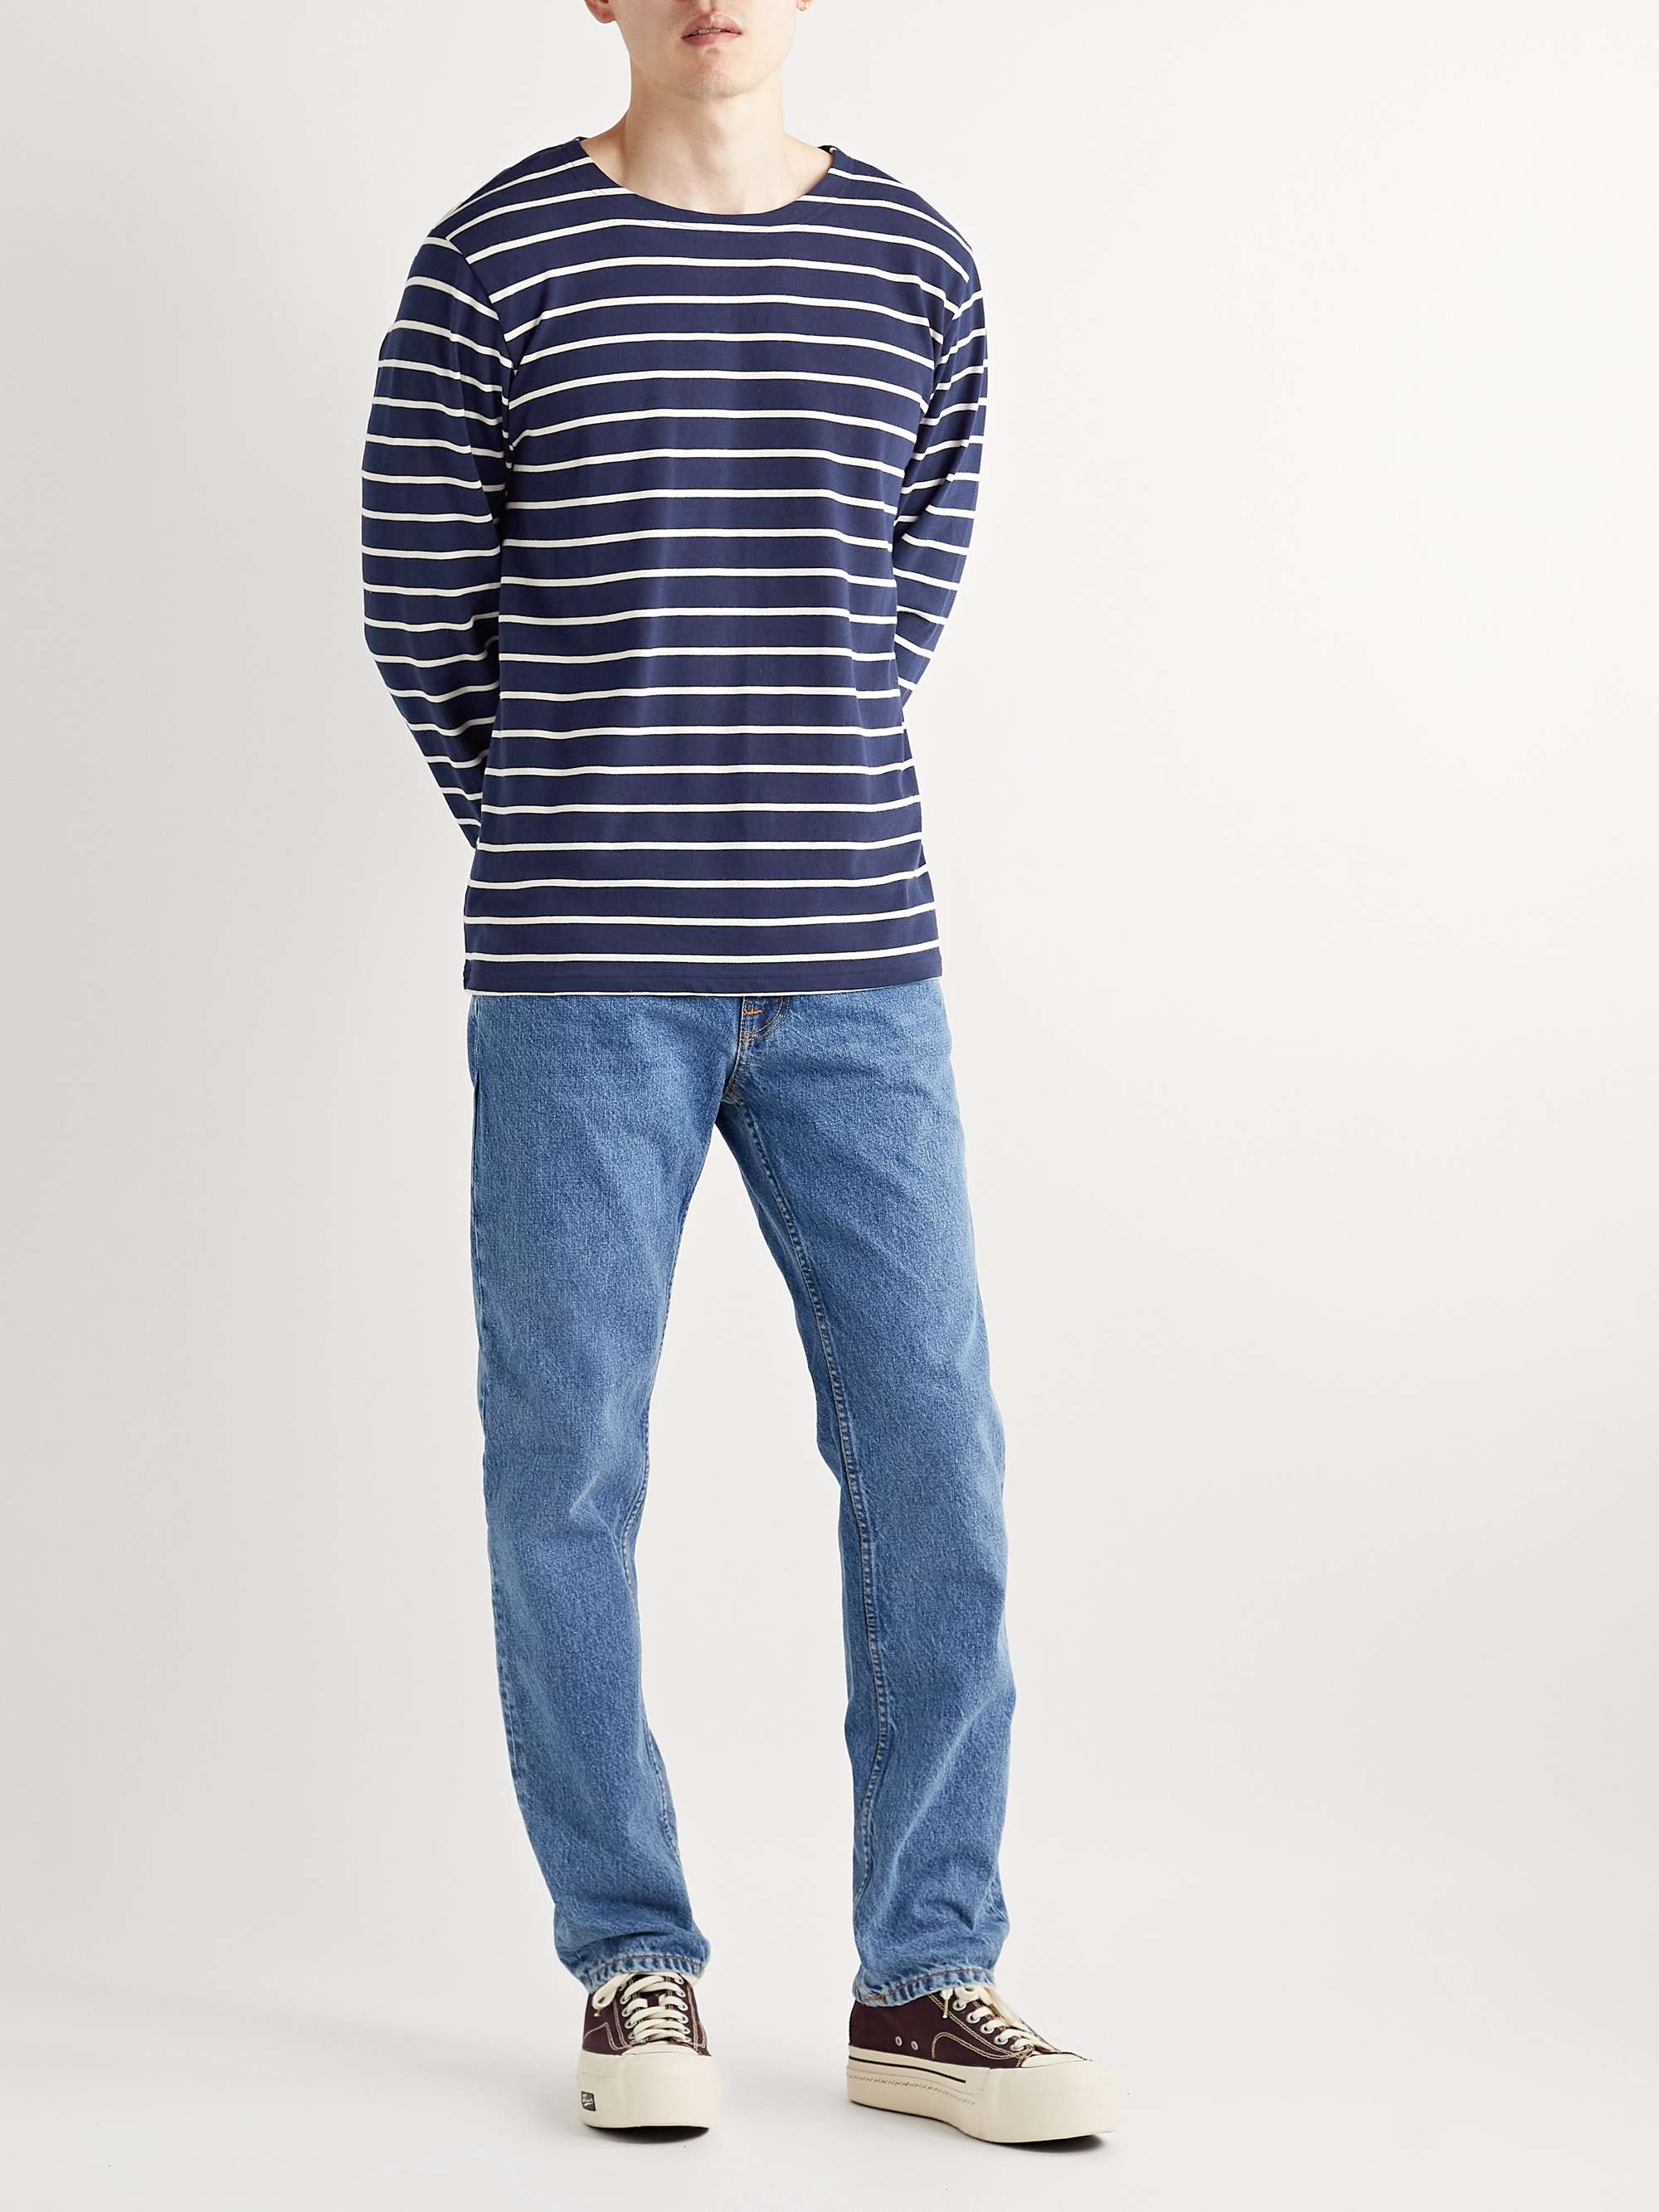 NUDIE JEANS Charles Striped Cotton-Jersey T-Shirt for Men | MR PORTER